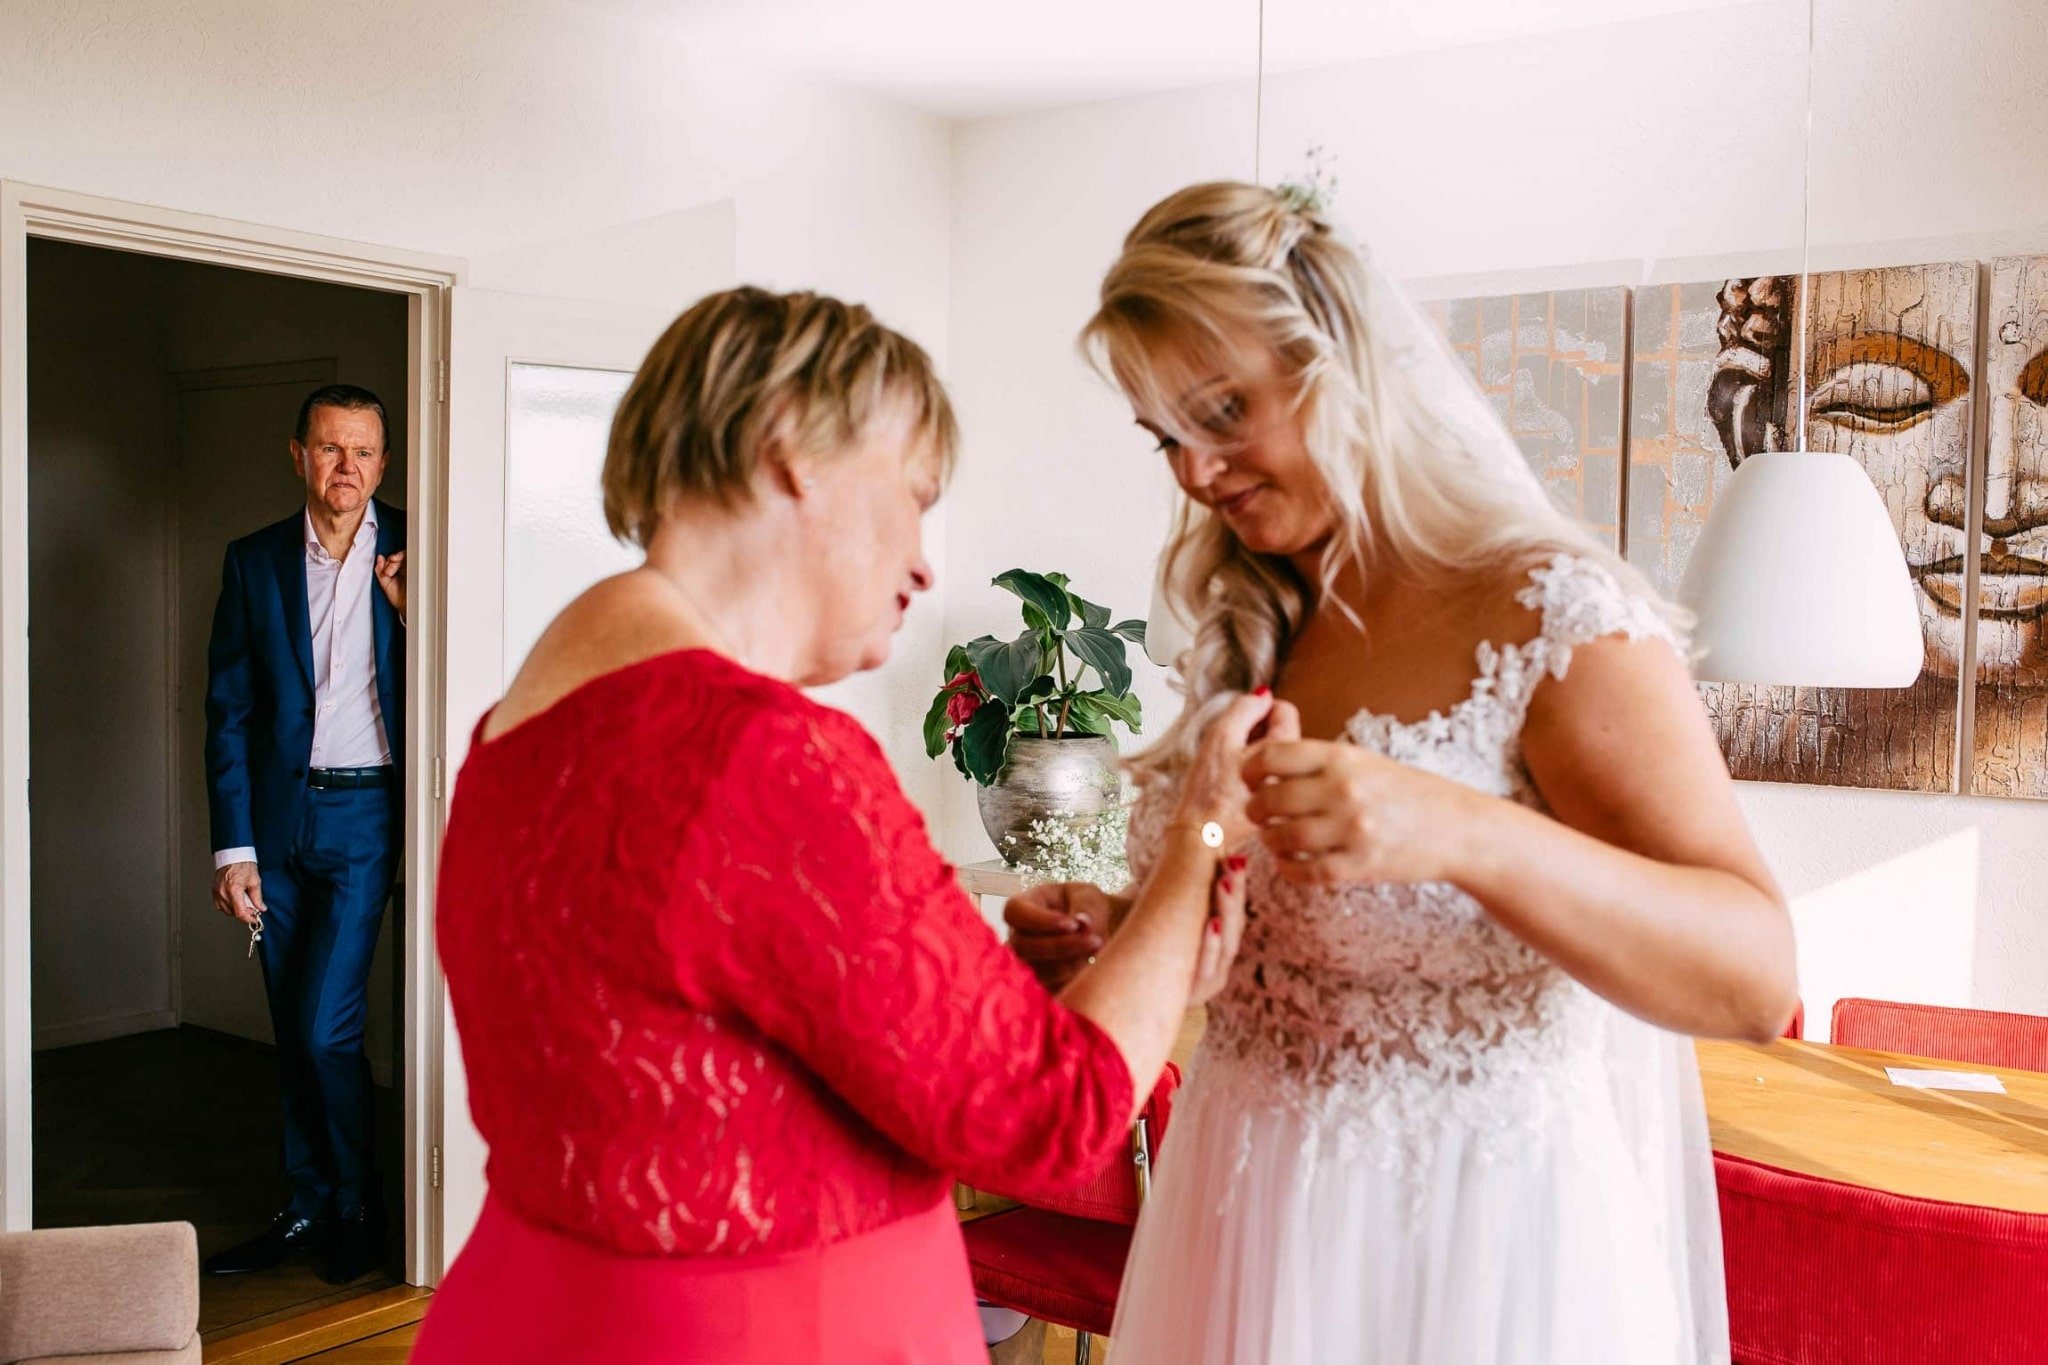 A bride helps her mother put on her wedding dress.